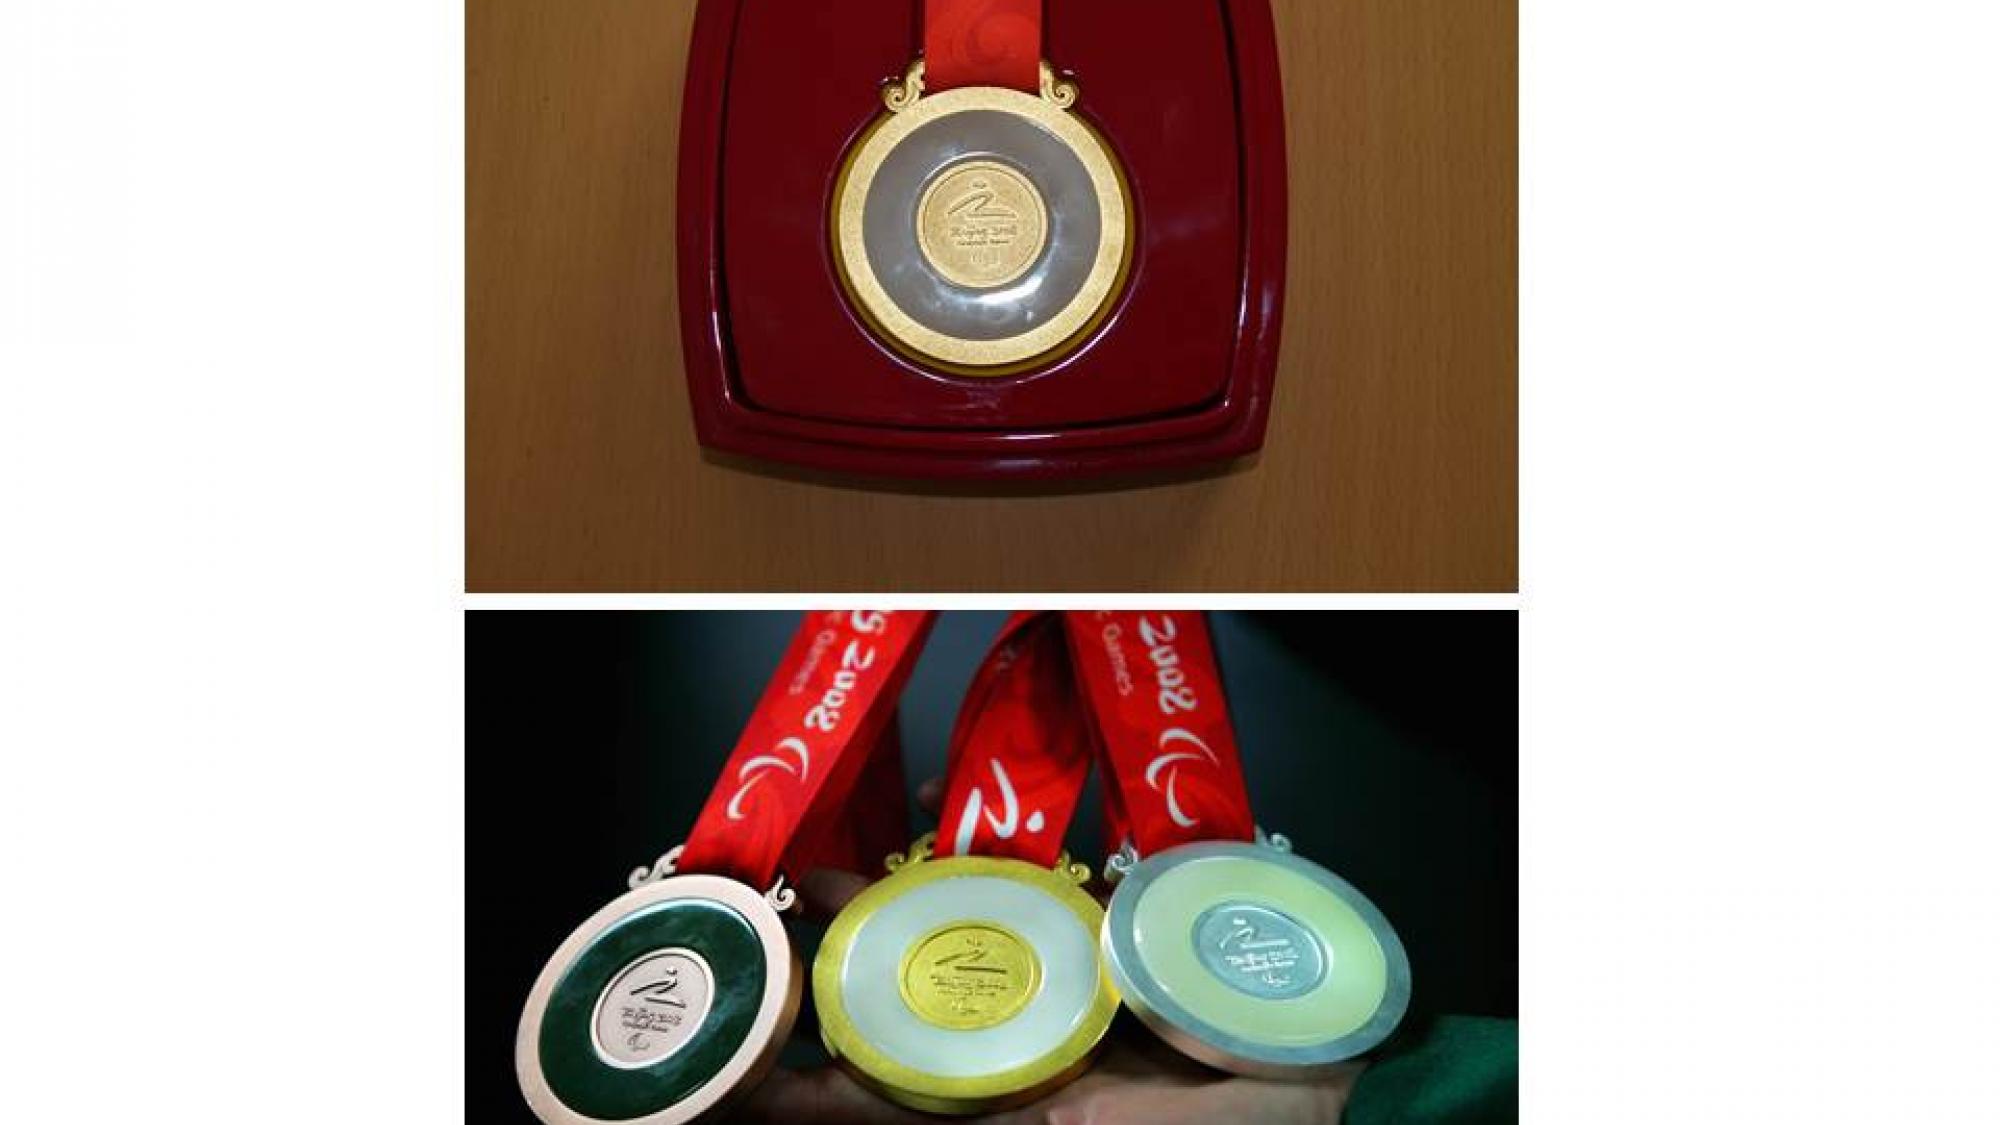 The medals of the Beijing 2008 Paralympic Games